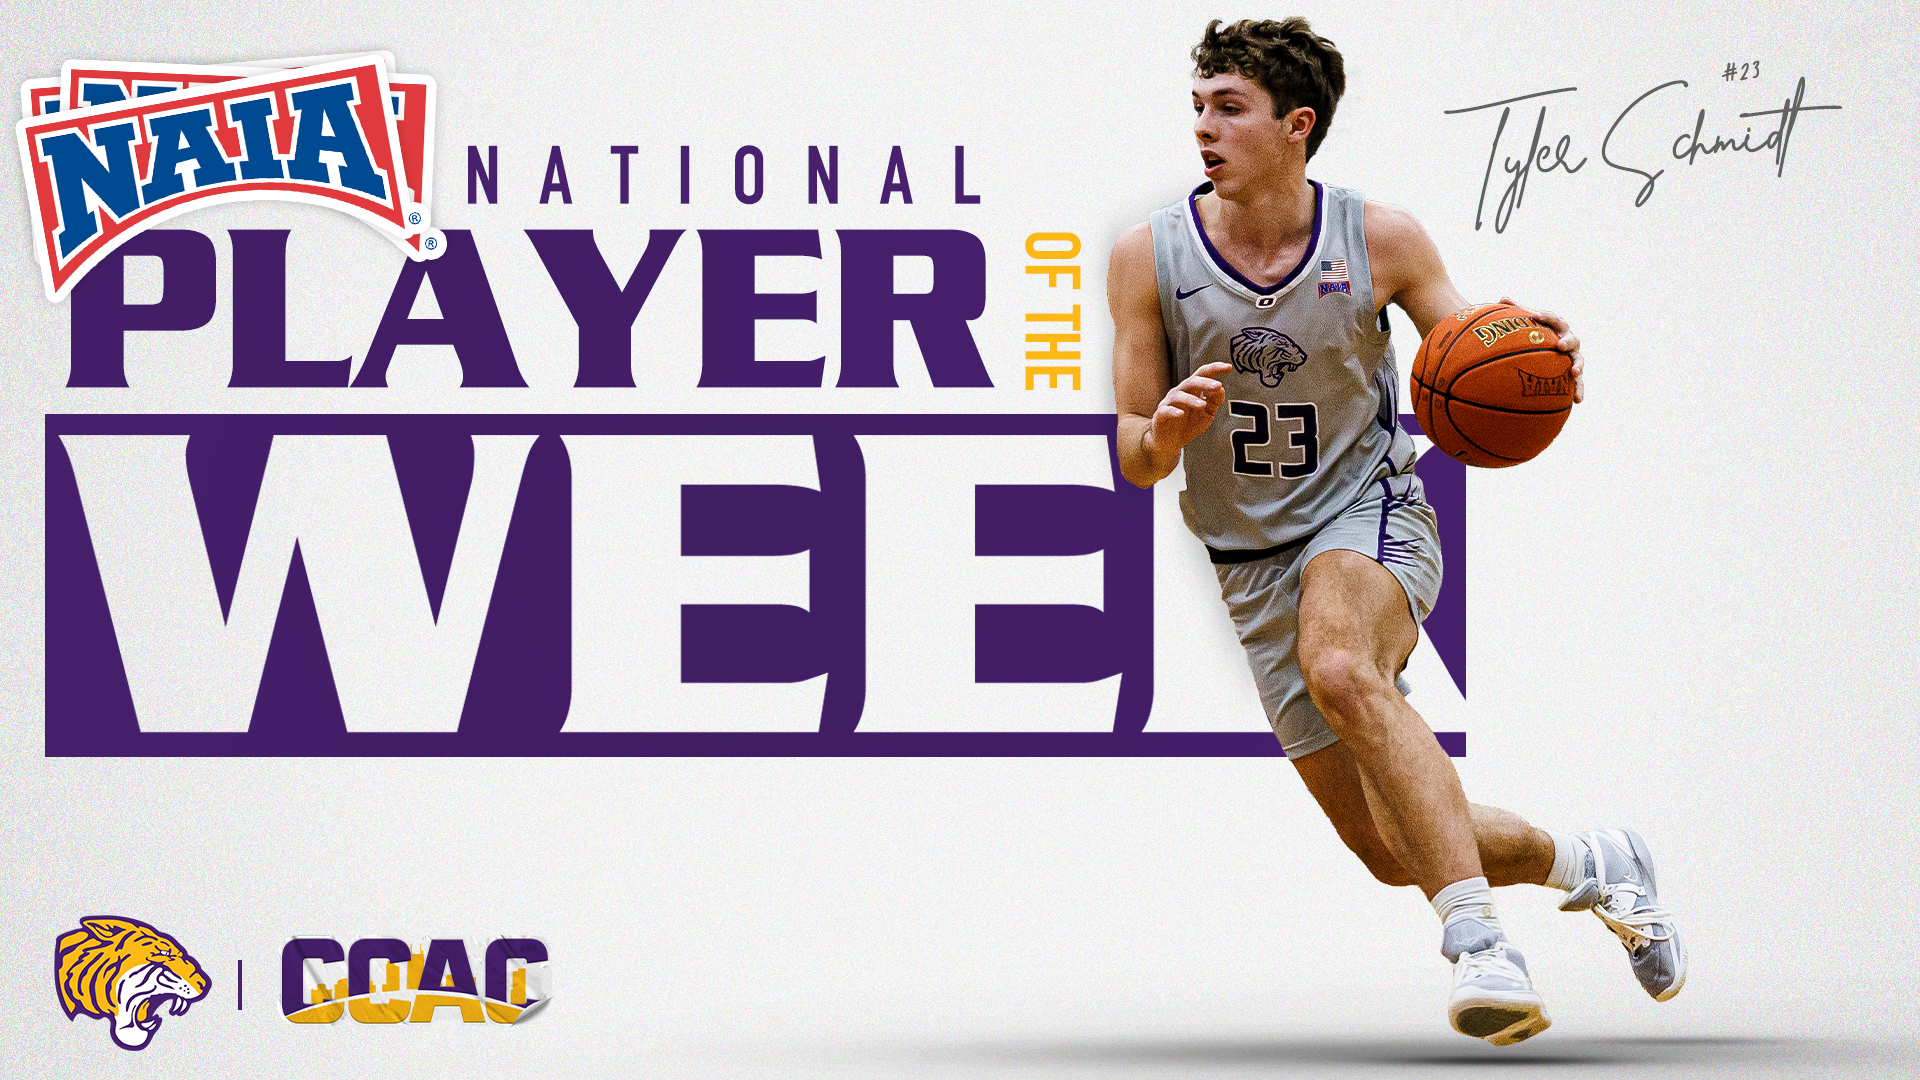 SCHMIDT COLLECTS CONFERENCE, NATIONAL PLAYER OF THE WEEK ACCORD